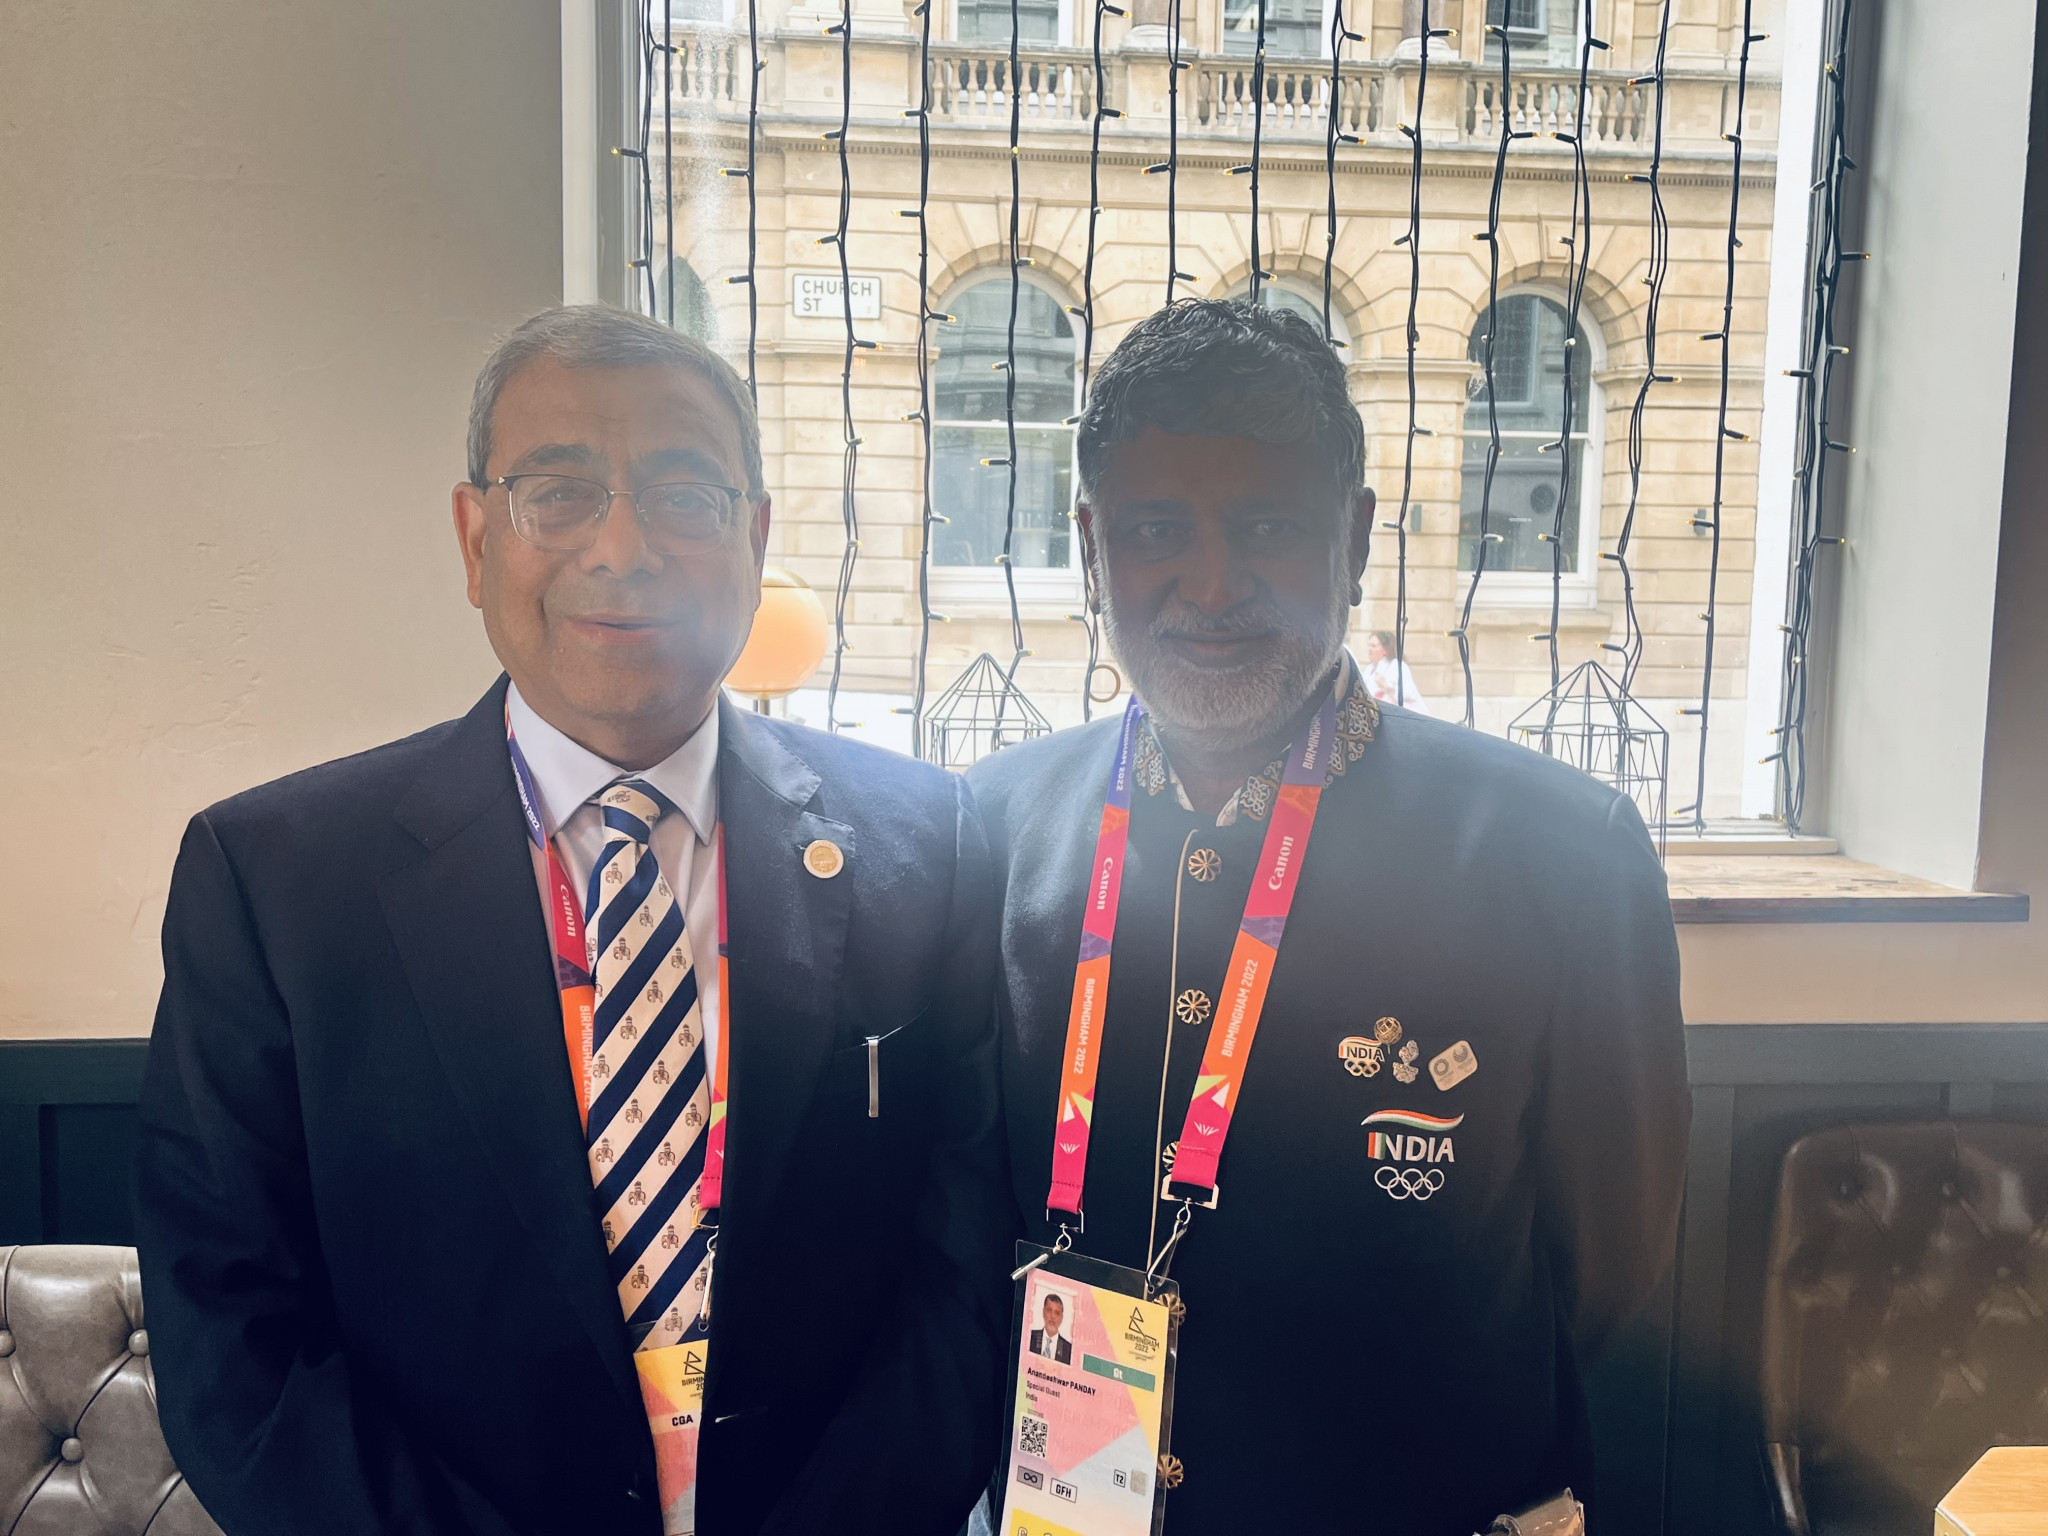 IOA Acting President Anil Khanna, left, and treasurer Anandeshwar Panday held "positive" talks with the CGF over the inclusion of shooting and wrestling at Victoria 2026 ©ITG